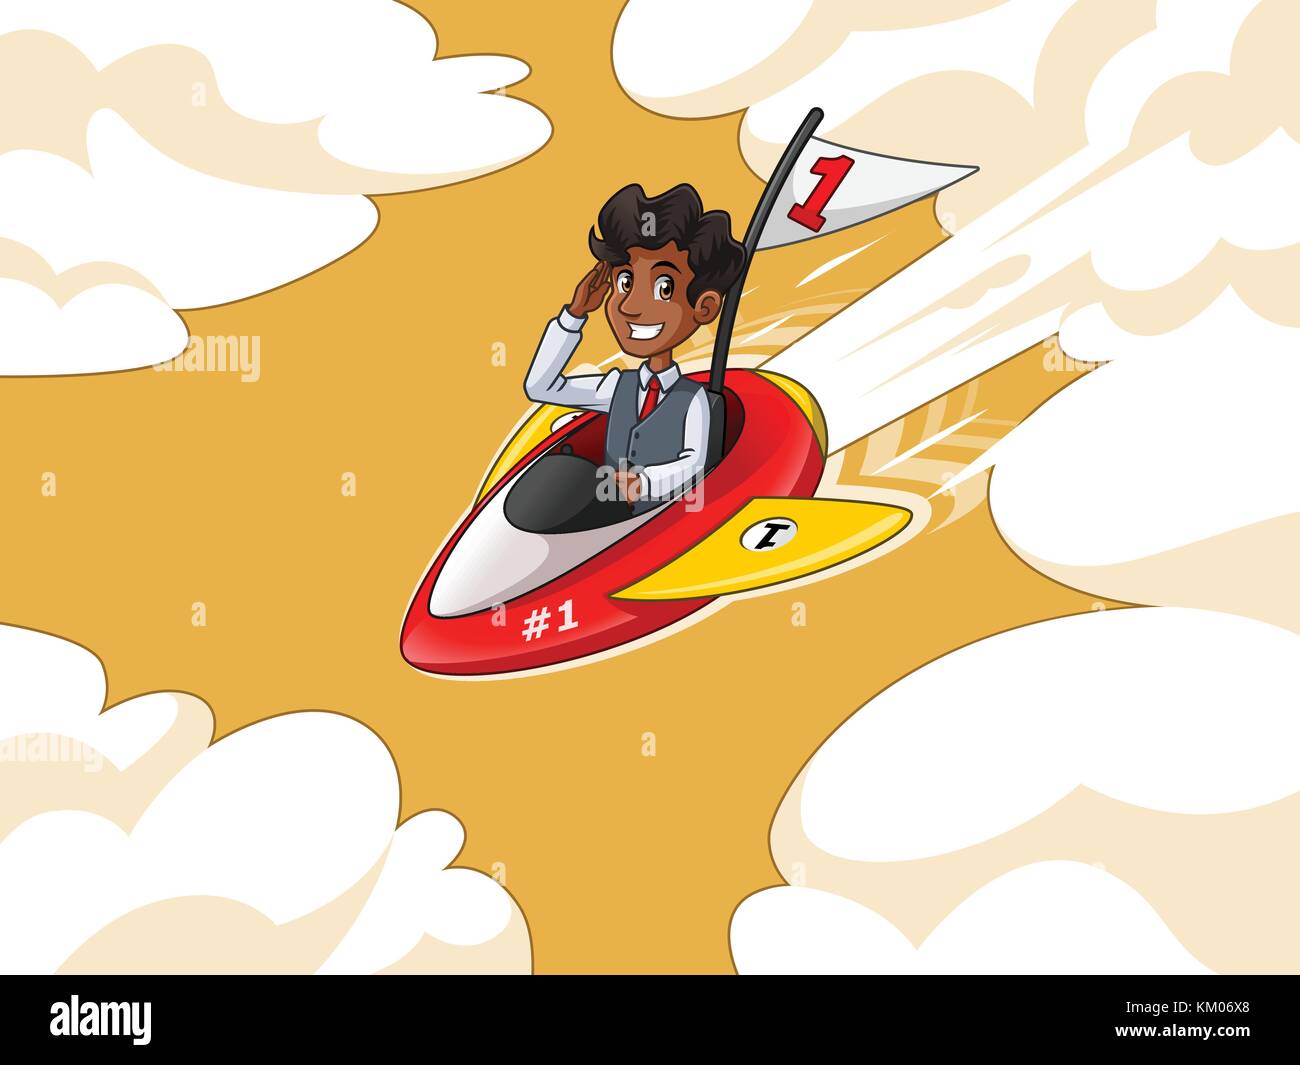 Businessman in vest cartoon character design riding a rocket with number one flag flying through the sky, against yellow background. Stock Vector